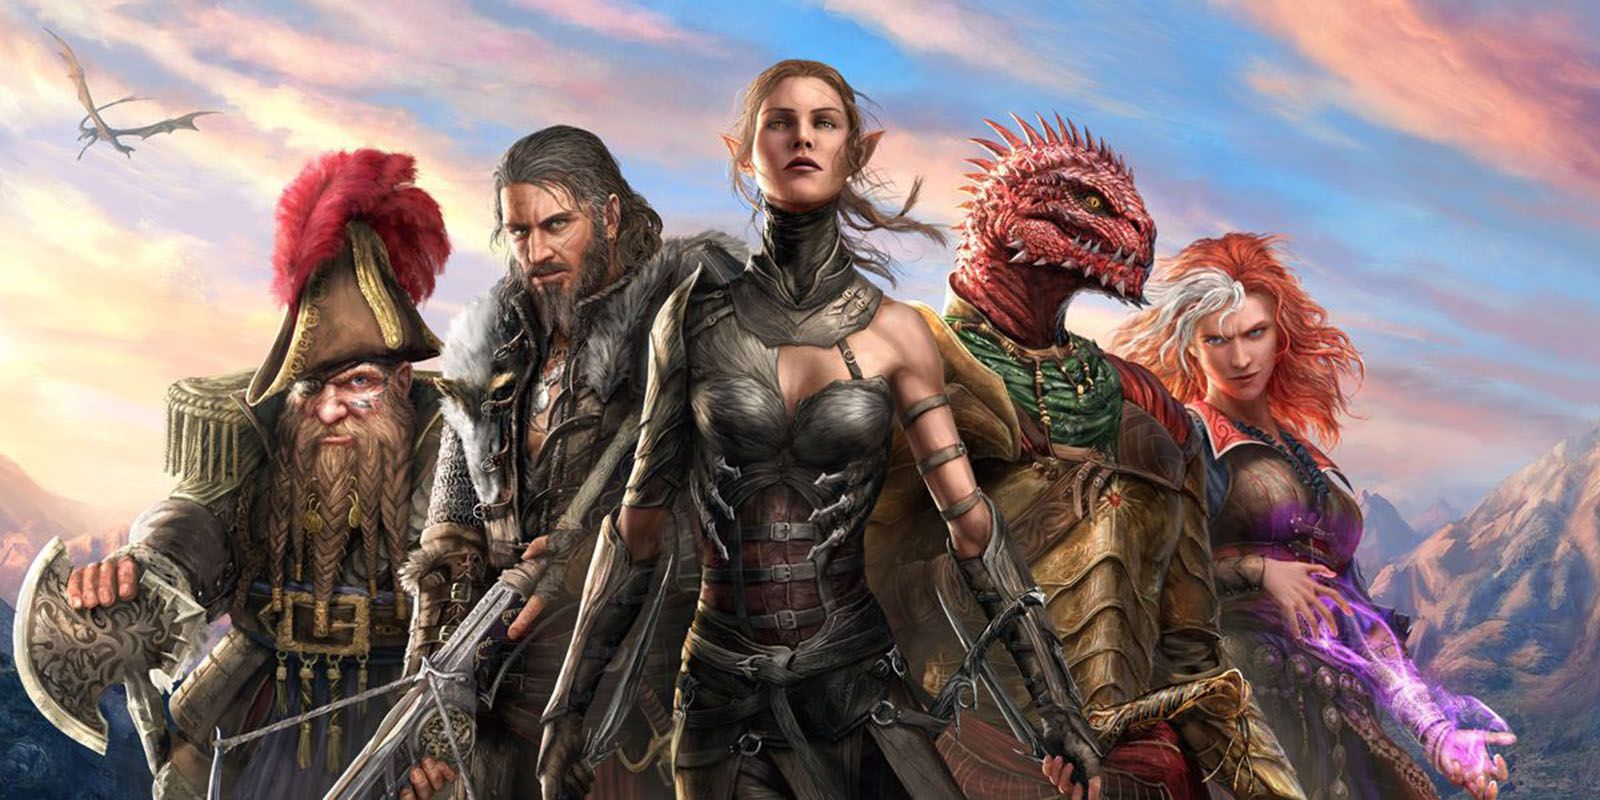 Divinity Original Sin 2 main characters in front of a landscape